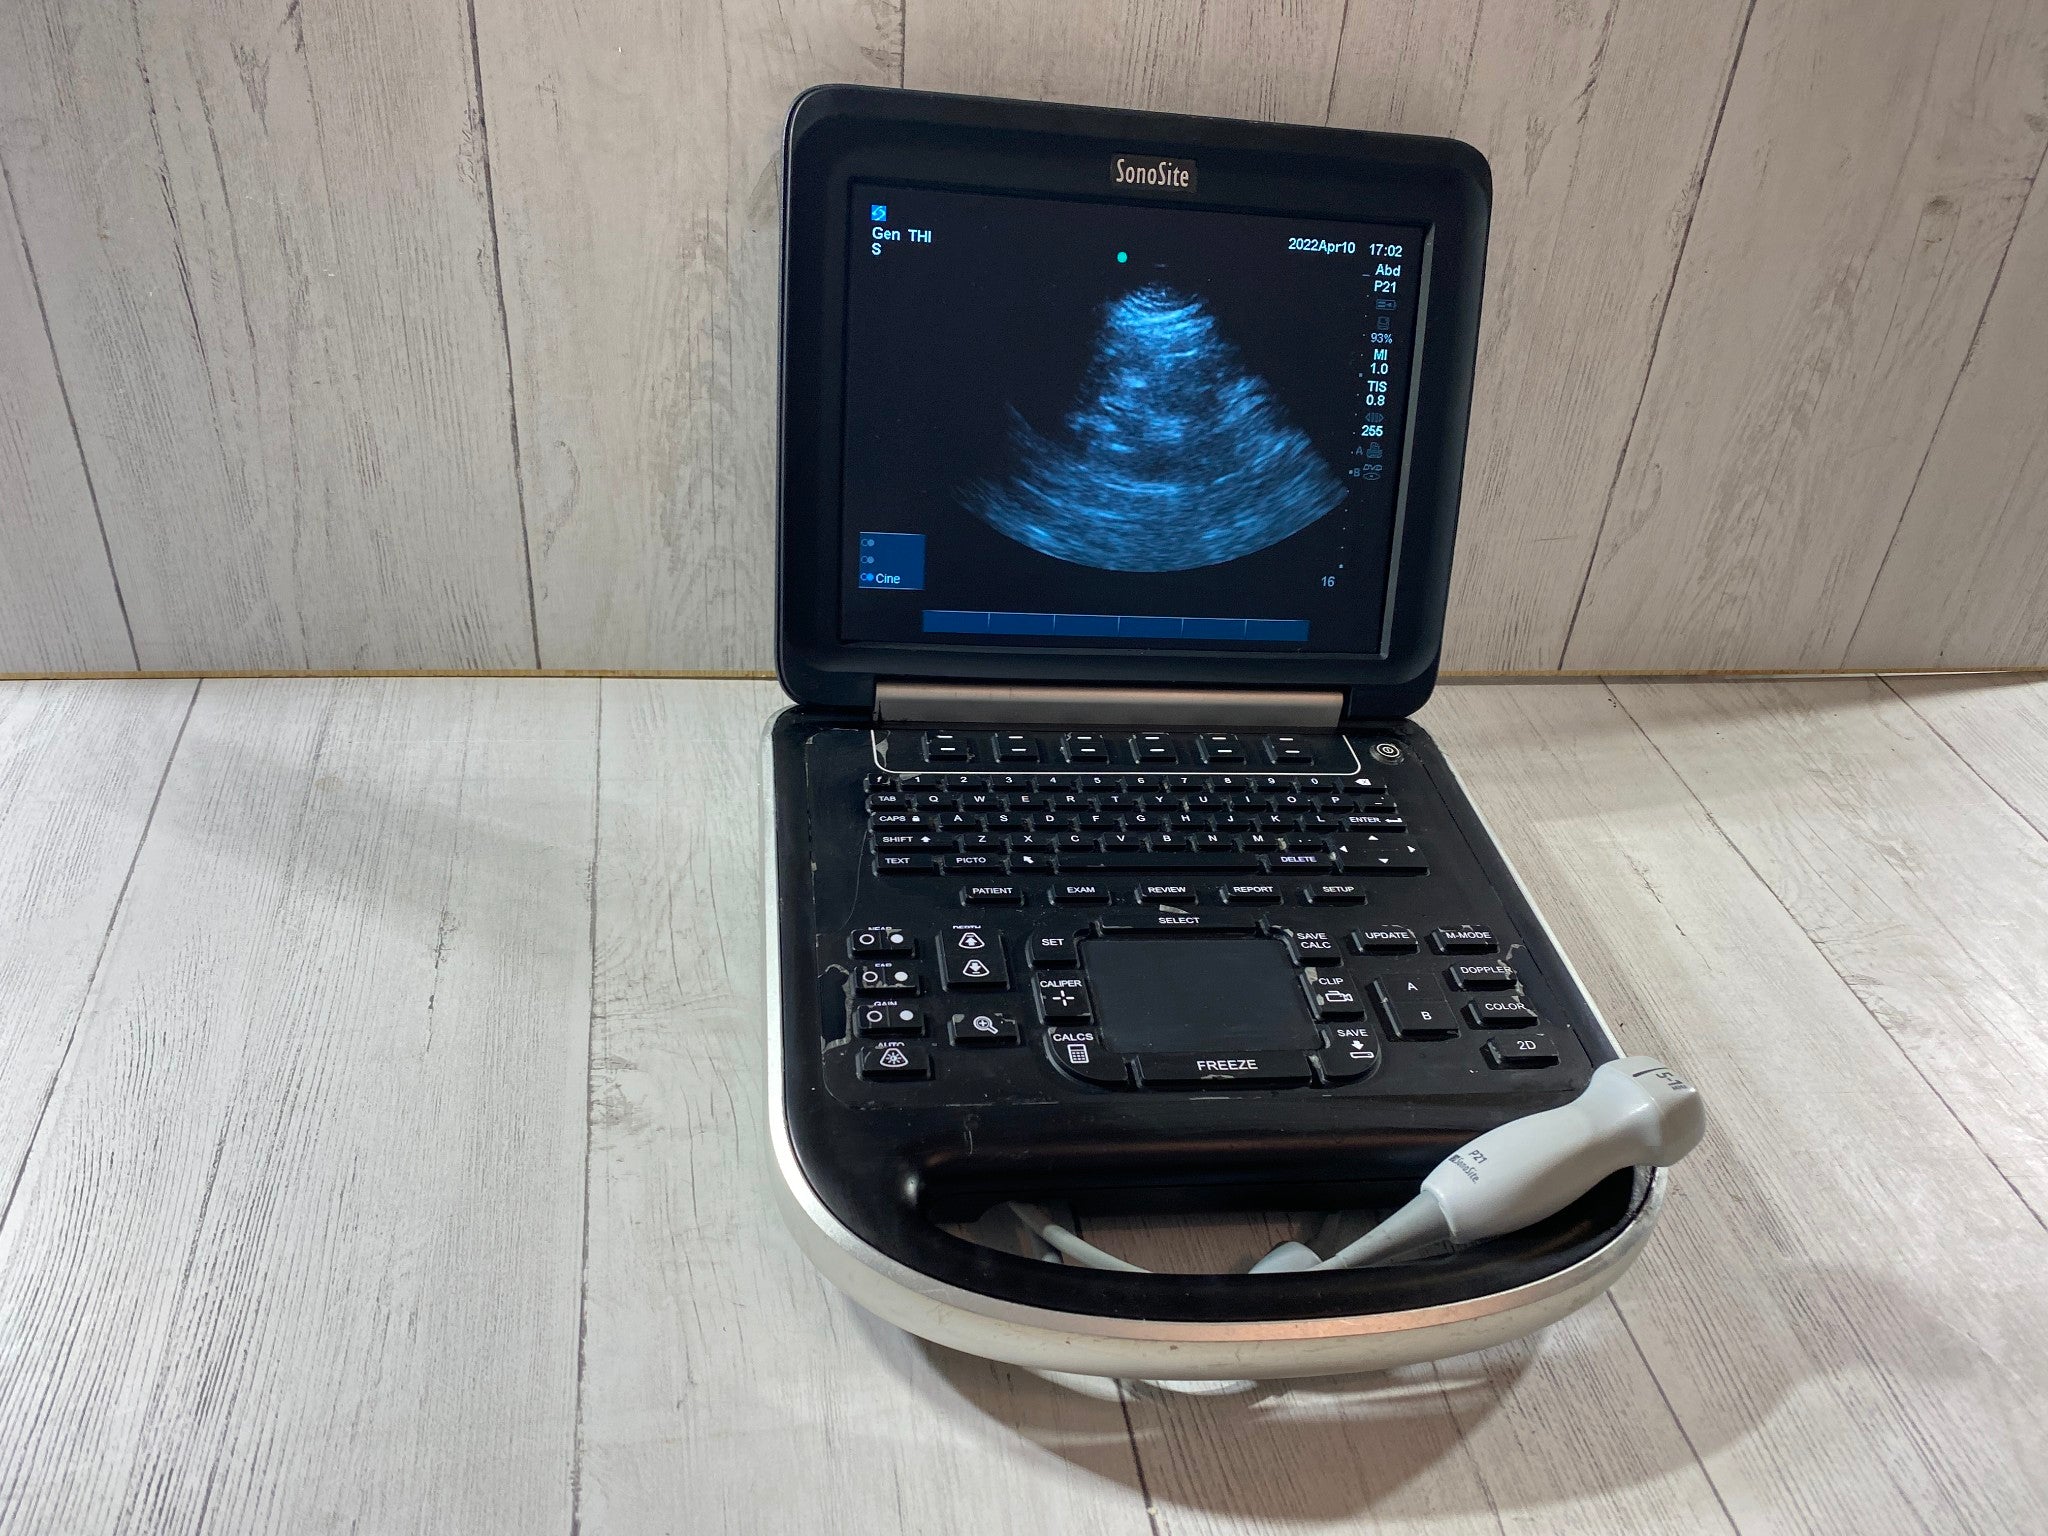 Sonosite Edge Portable ultrasound Manufactured 2013 with P21 Cardiac probe DIAGNOSTIC ULTRASOUND MACHINES FOR SALE